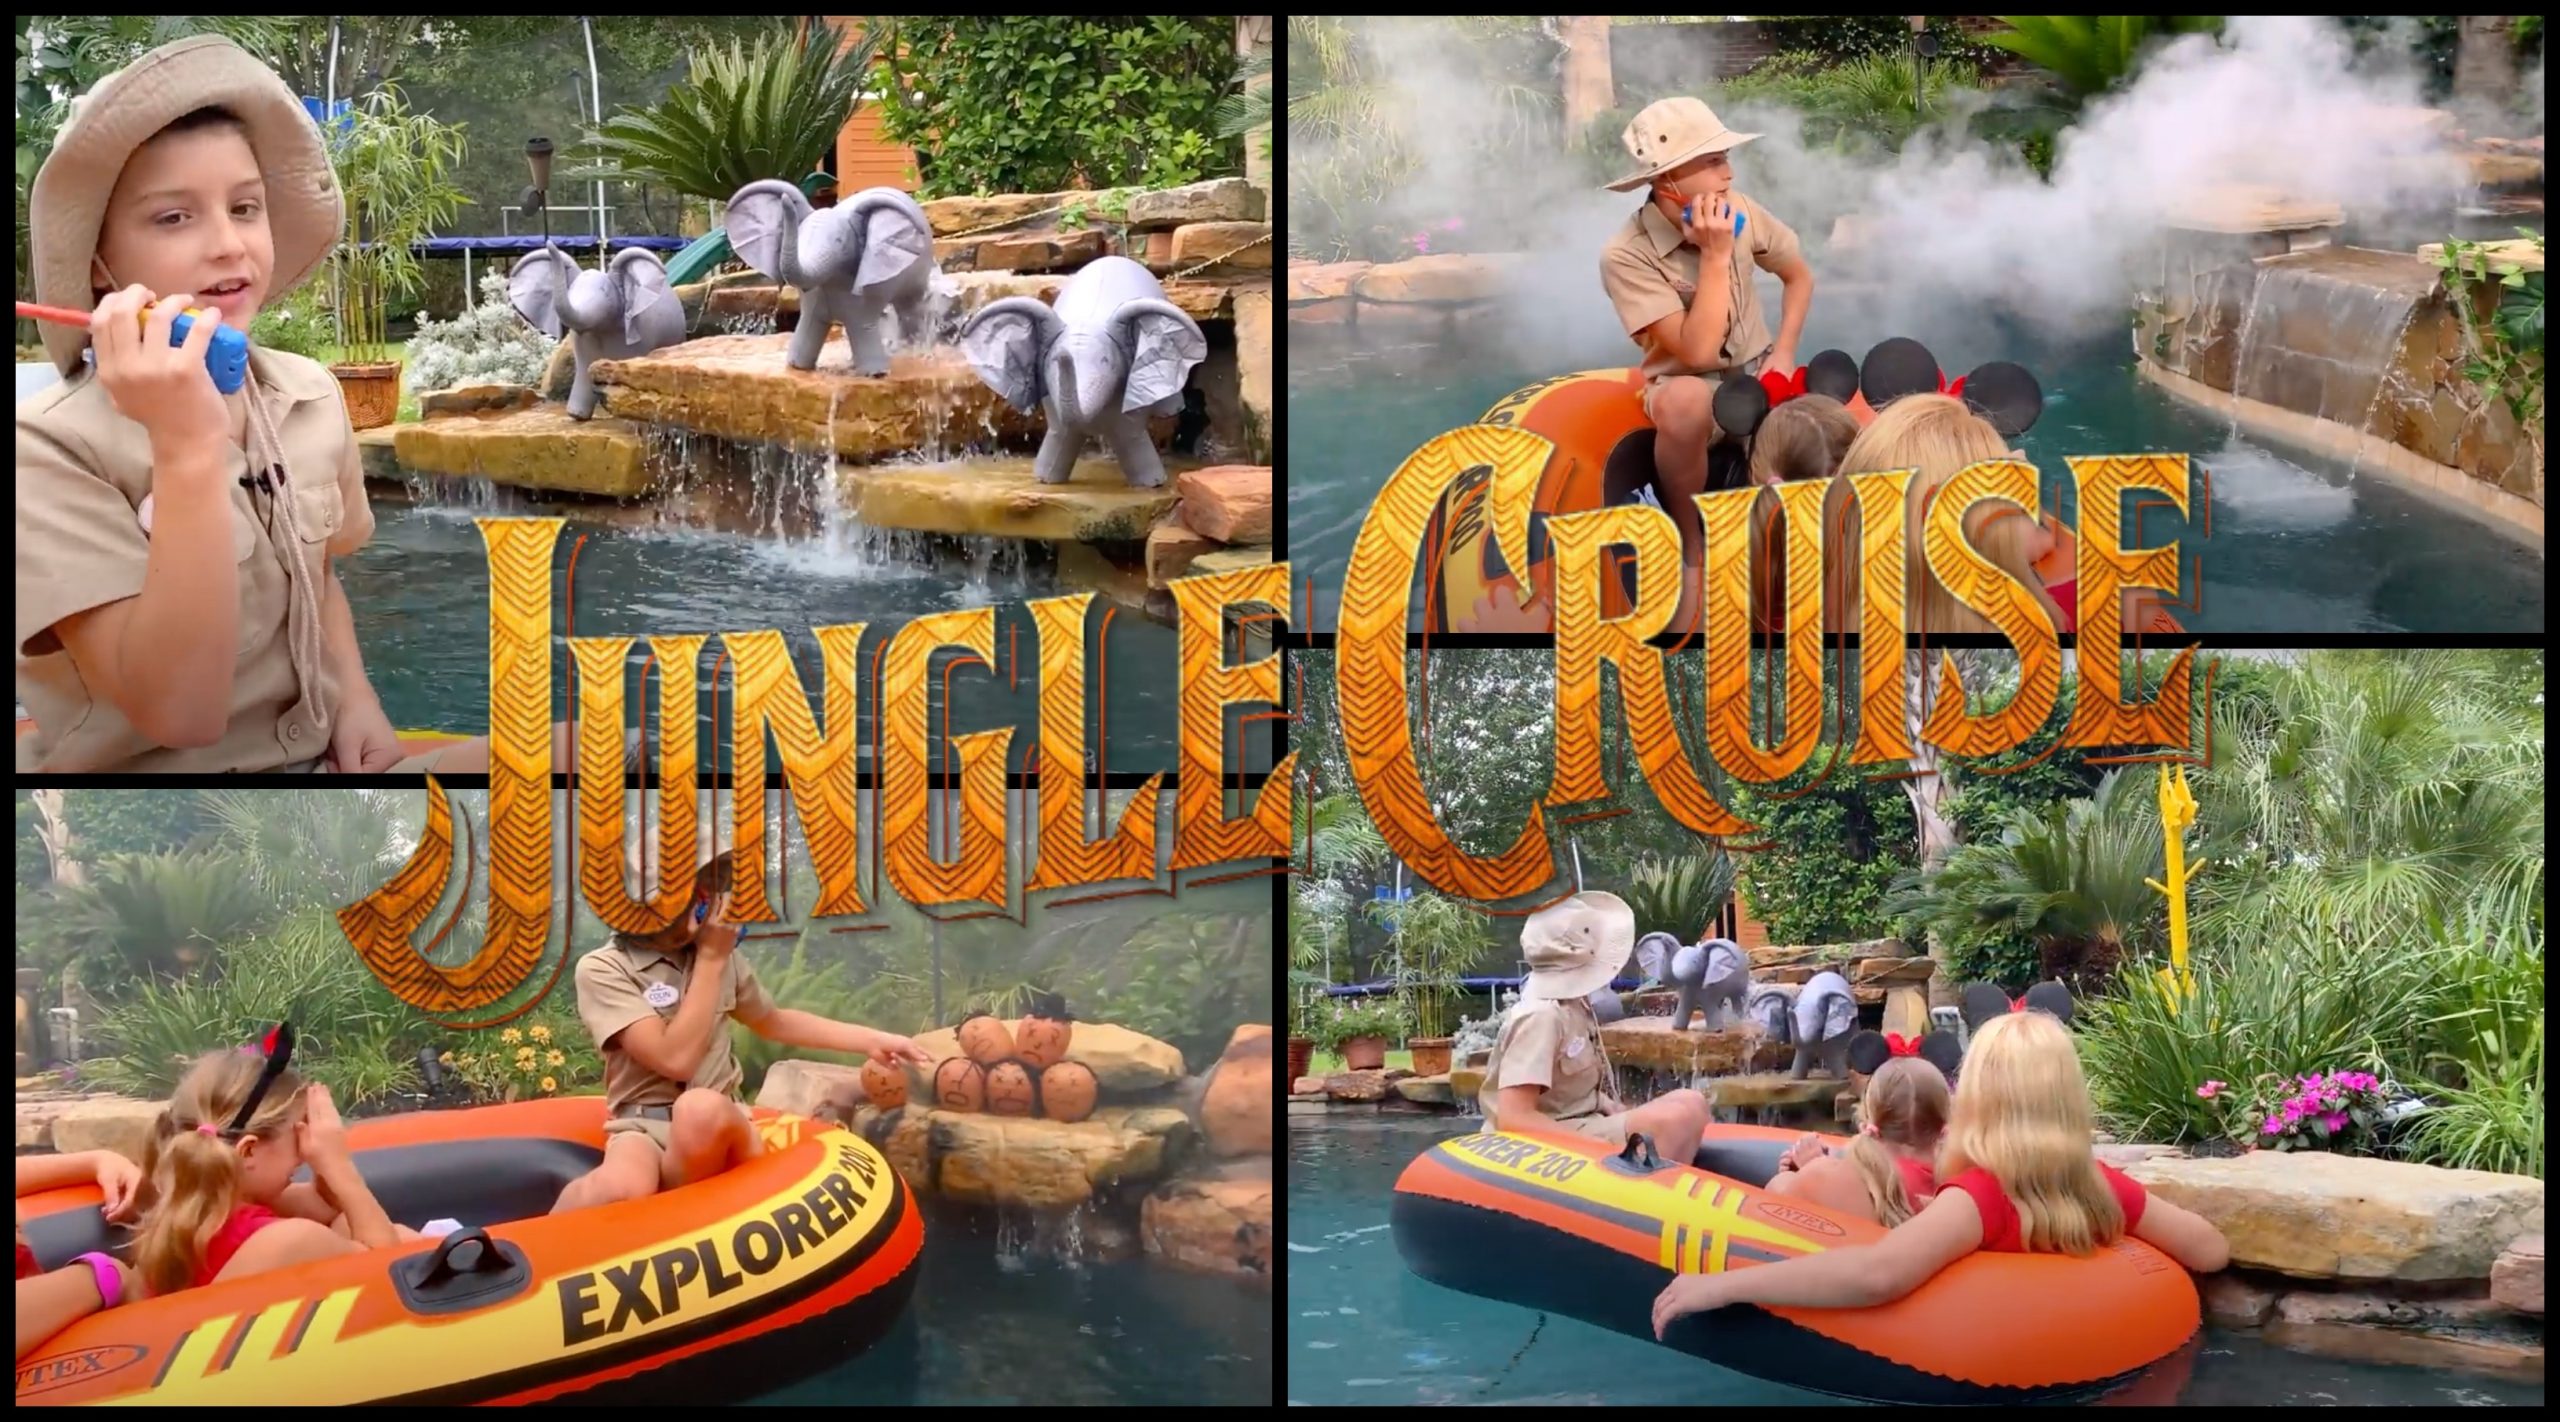 Disney Fans Magically Transform their Pool into the Jungle Cruise from the Disney Parks